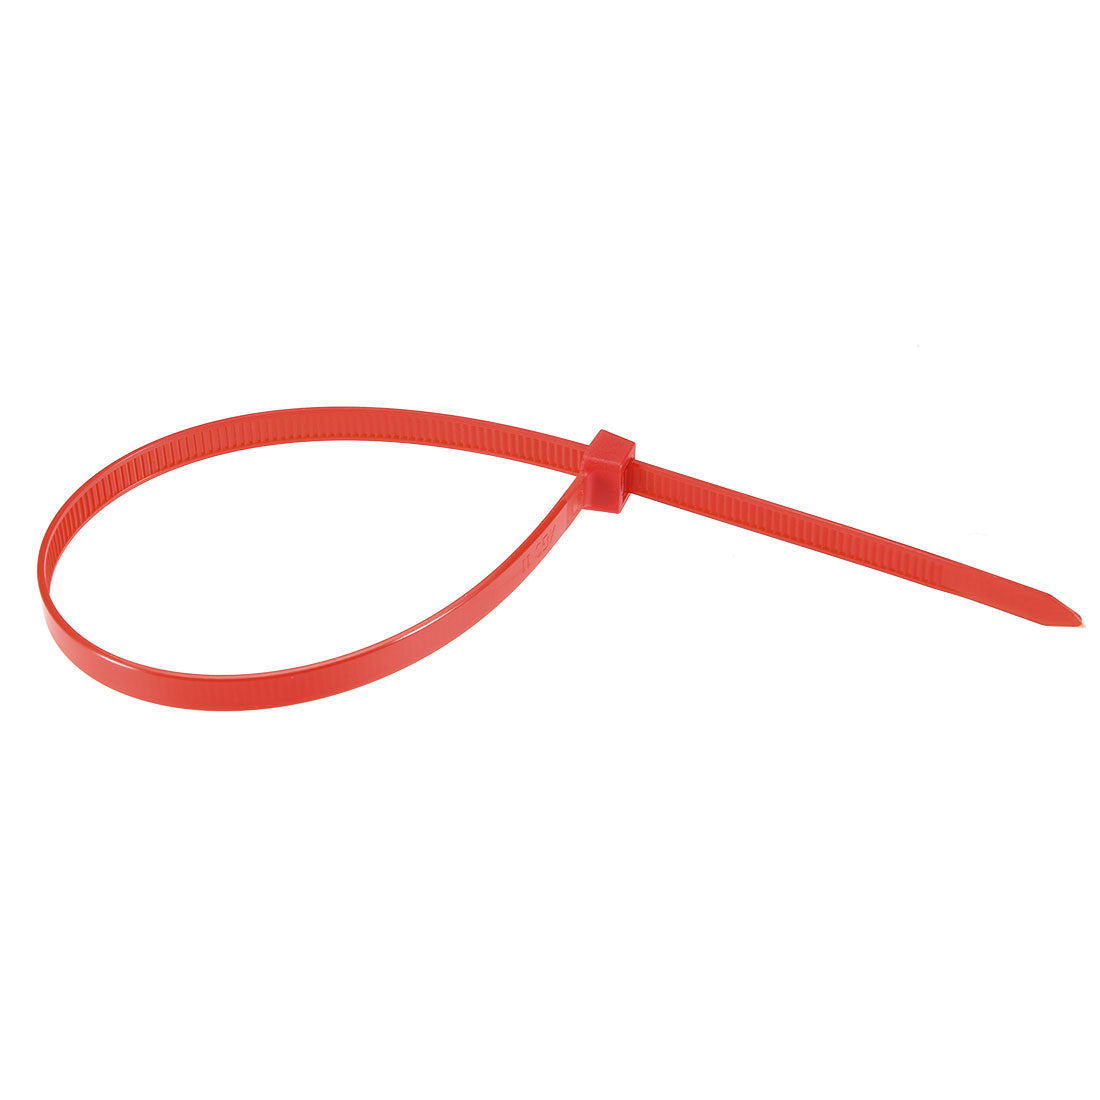 uxcell Uxcell Cable Zip Ties 200mmx4.8mm Self-Locking Nylon Tie Wraps Red 40pcs